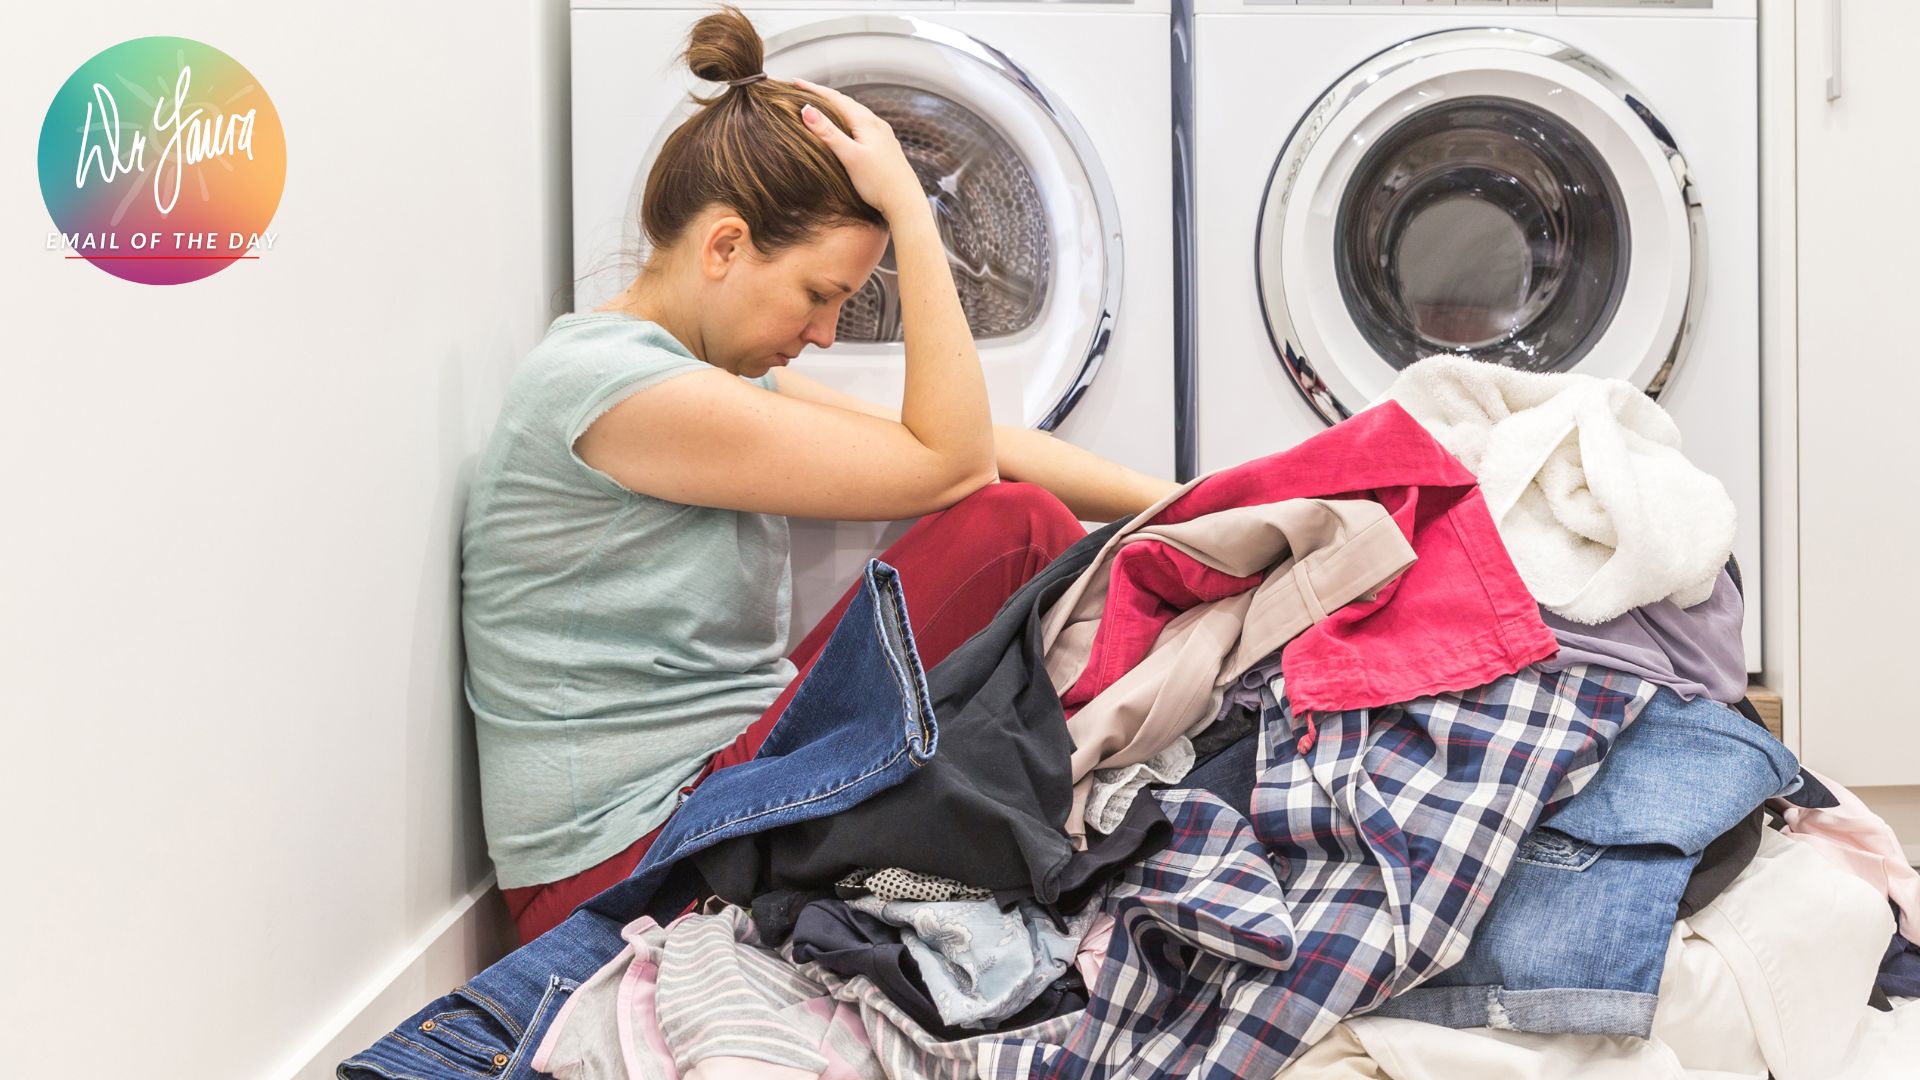 Woman sits on ground in laundry room while head in her hands in front of a pile of clothes